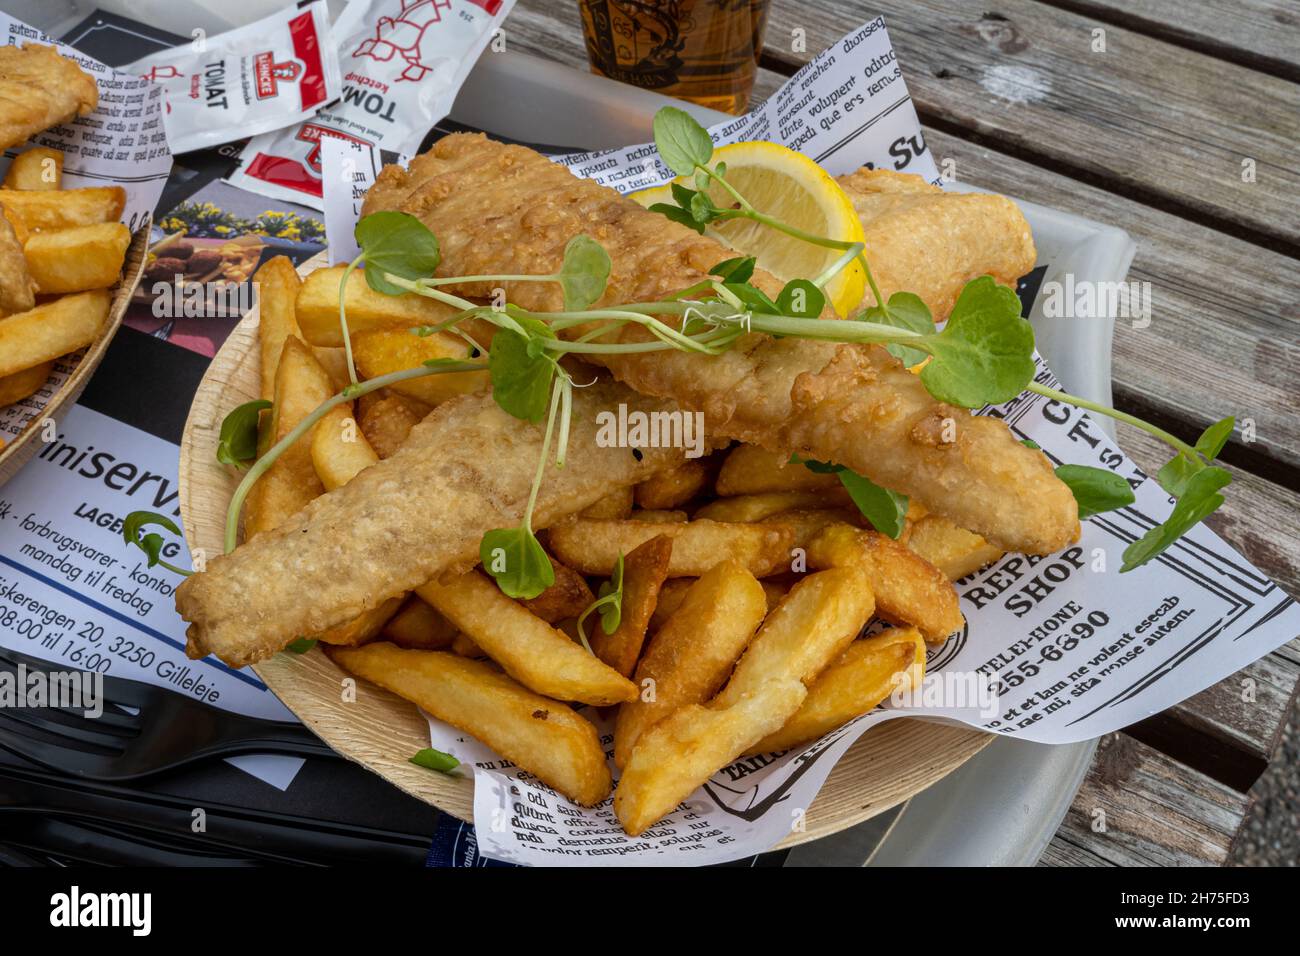 October 10, 2021 - Hundested, Denmark: A plate of delicious fish and chips. Business as usual in the restaurants in the marina Stock Photo